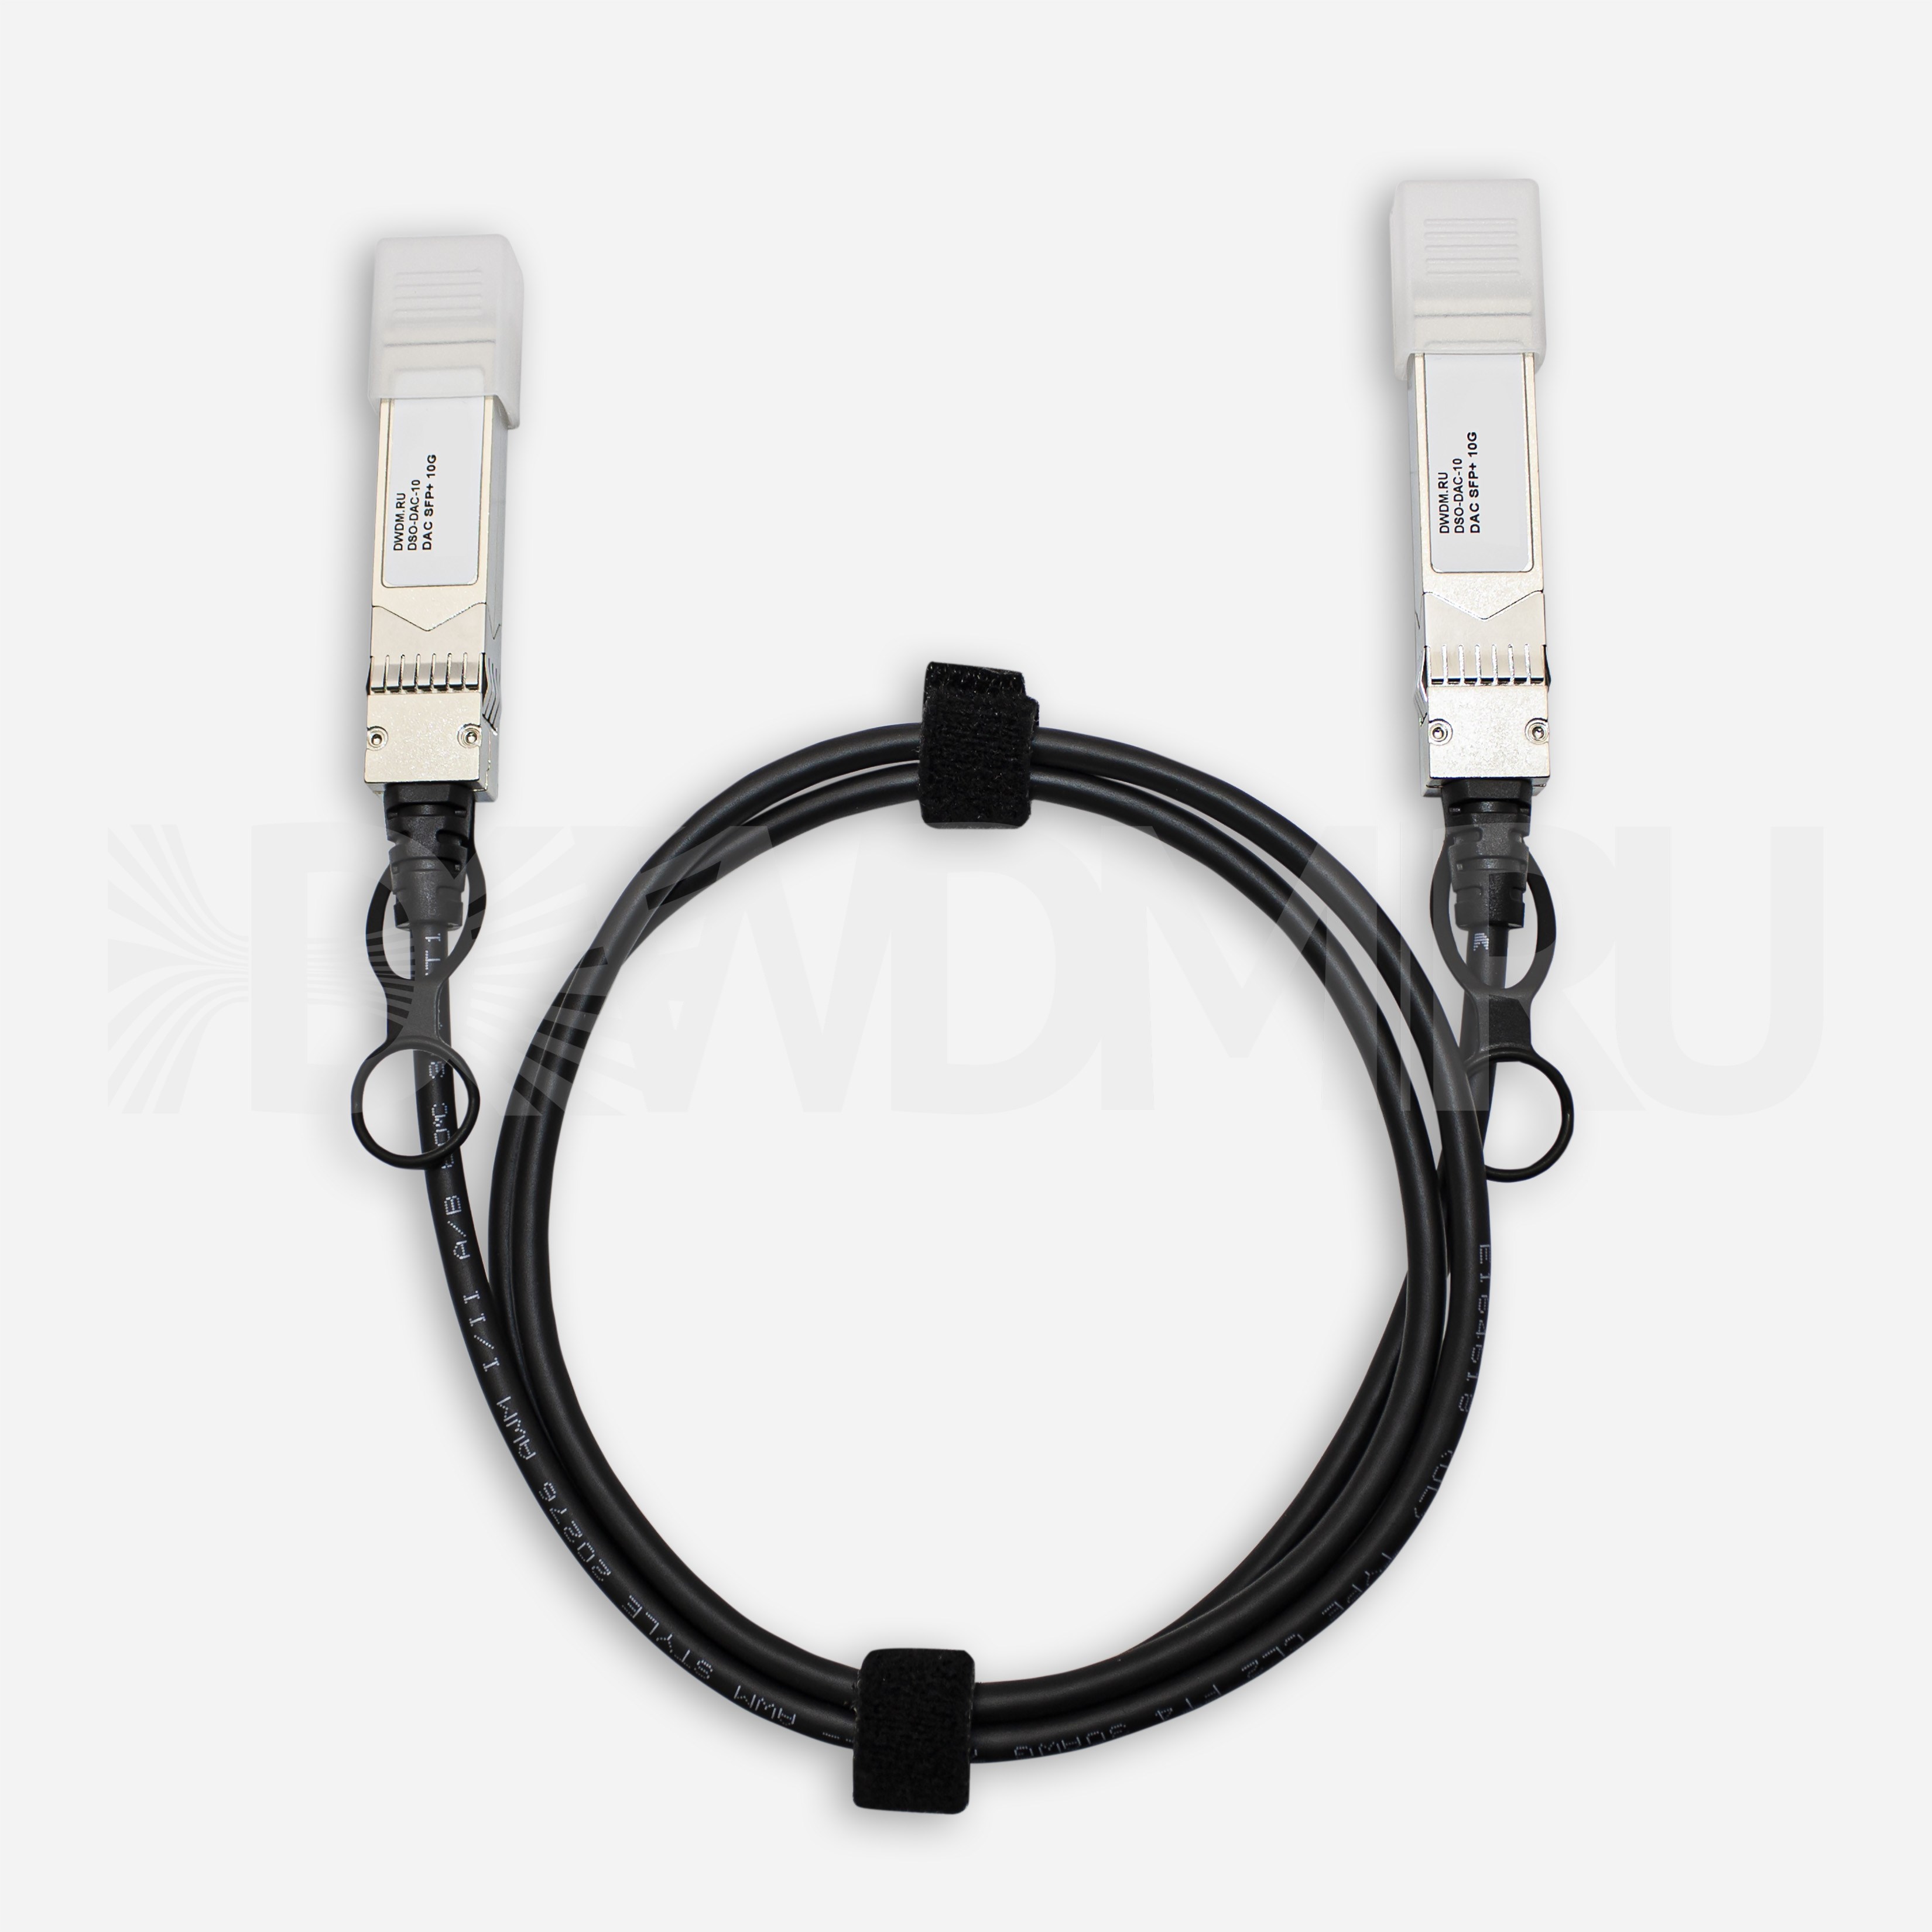 Кабель Direct Attached, SFP+, 30AWG, 10 Гб/с, 3 м - ДВДМ.РУ (DSO-DAC-10-3)